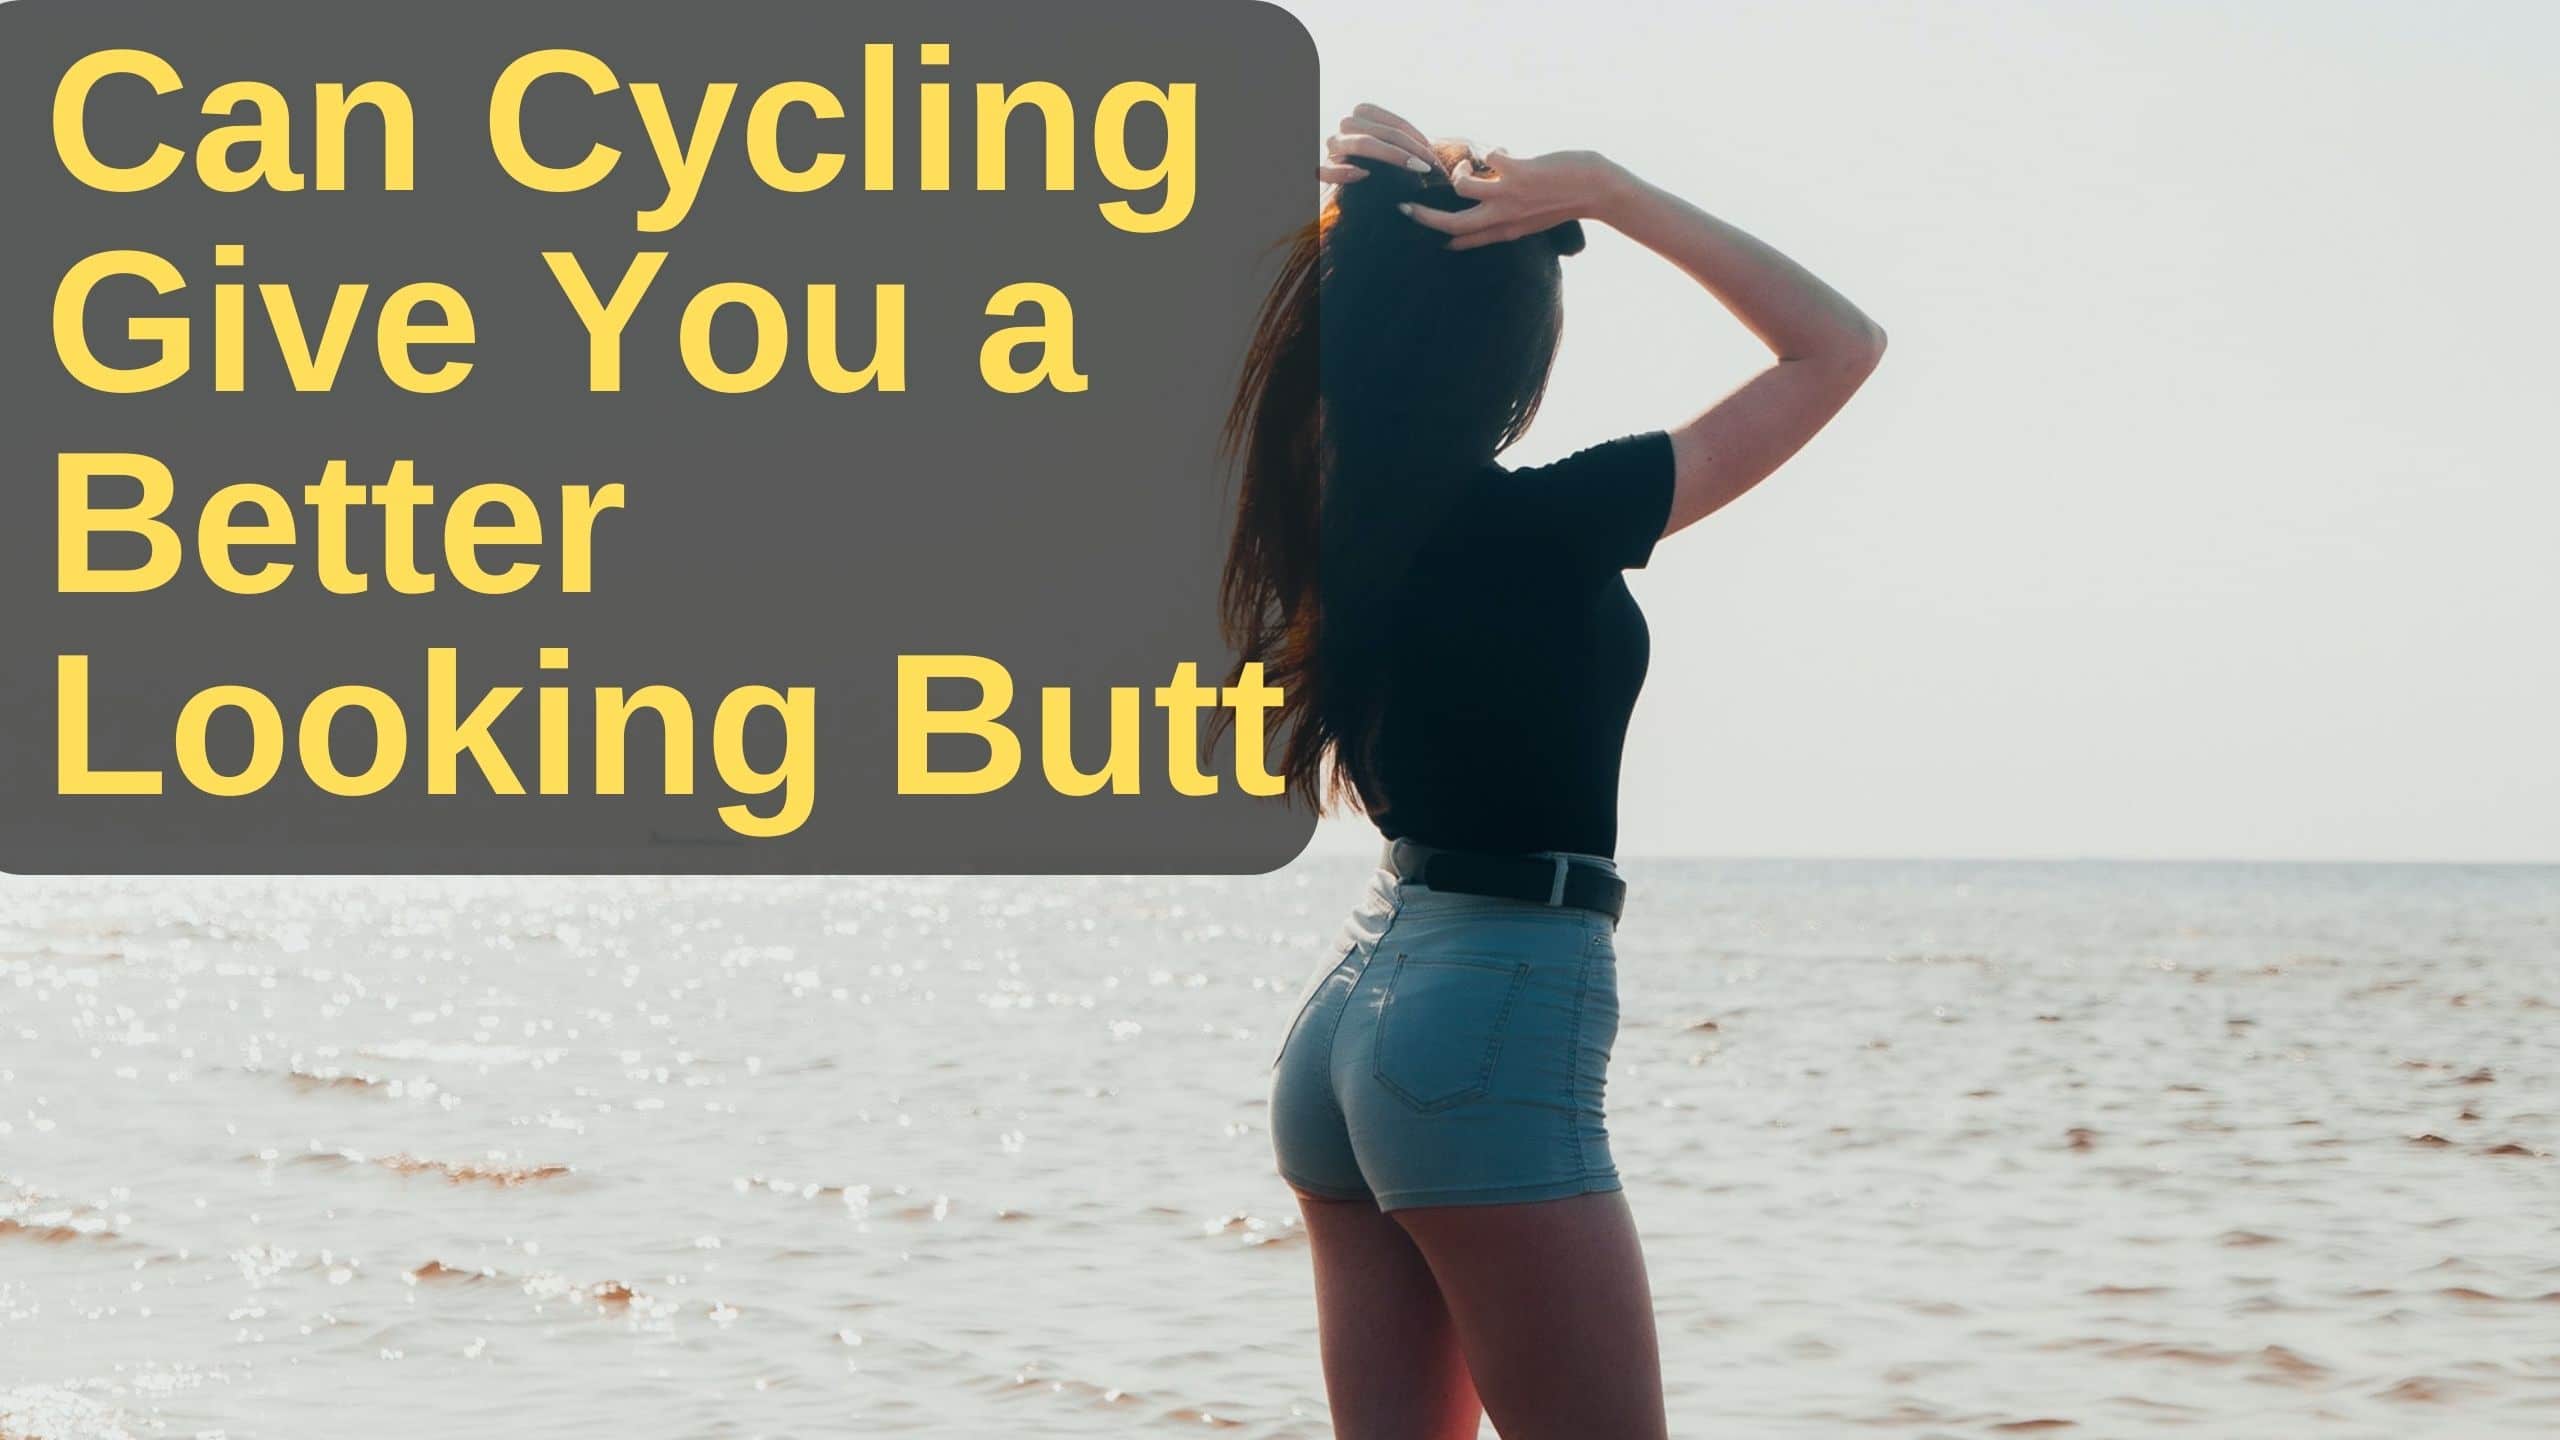 Can Cycling Give You a Better Looking Butt